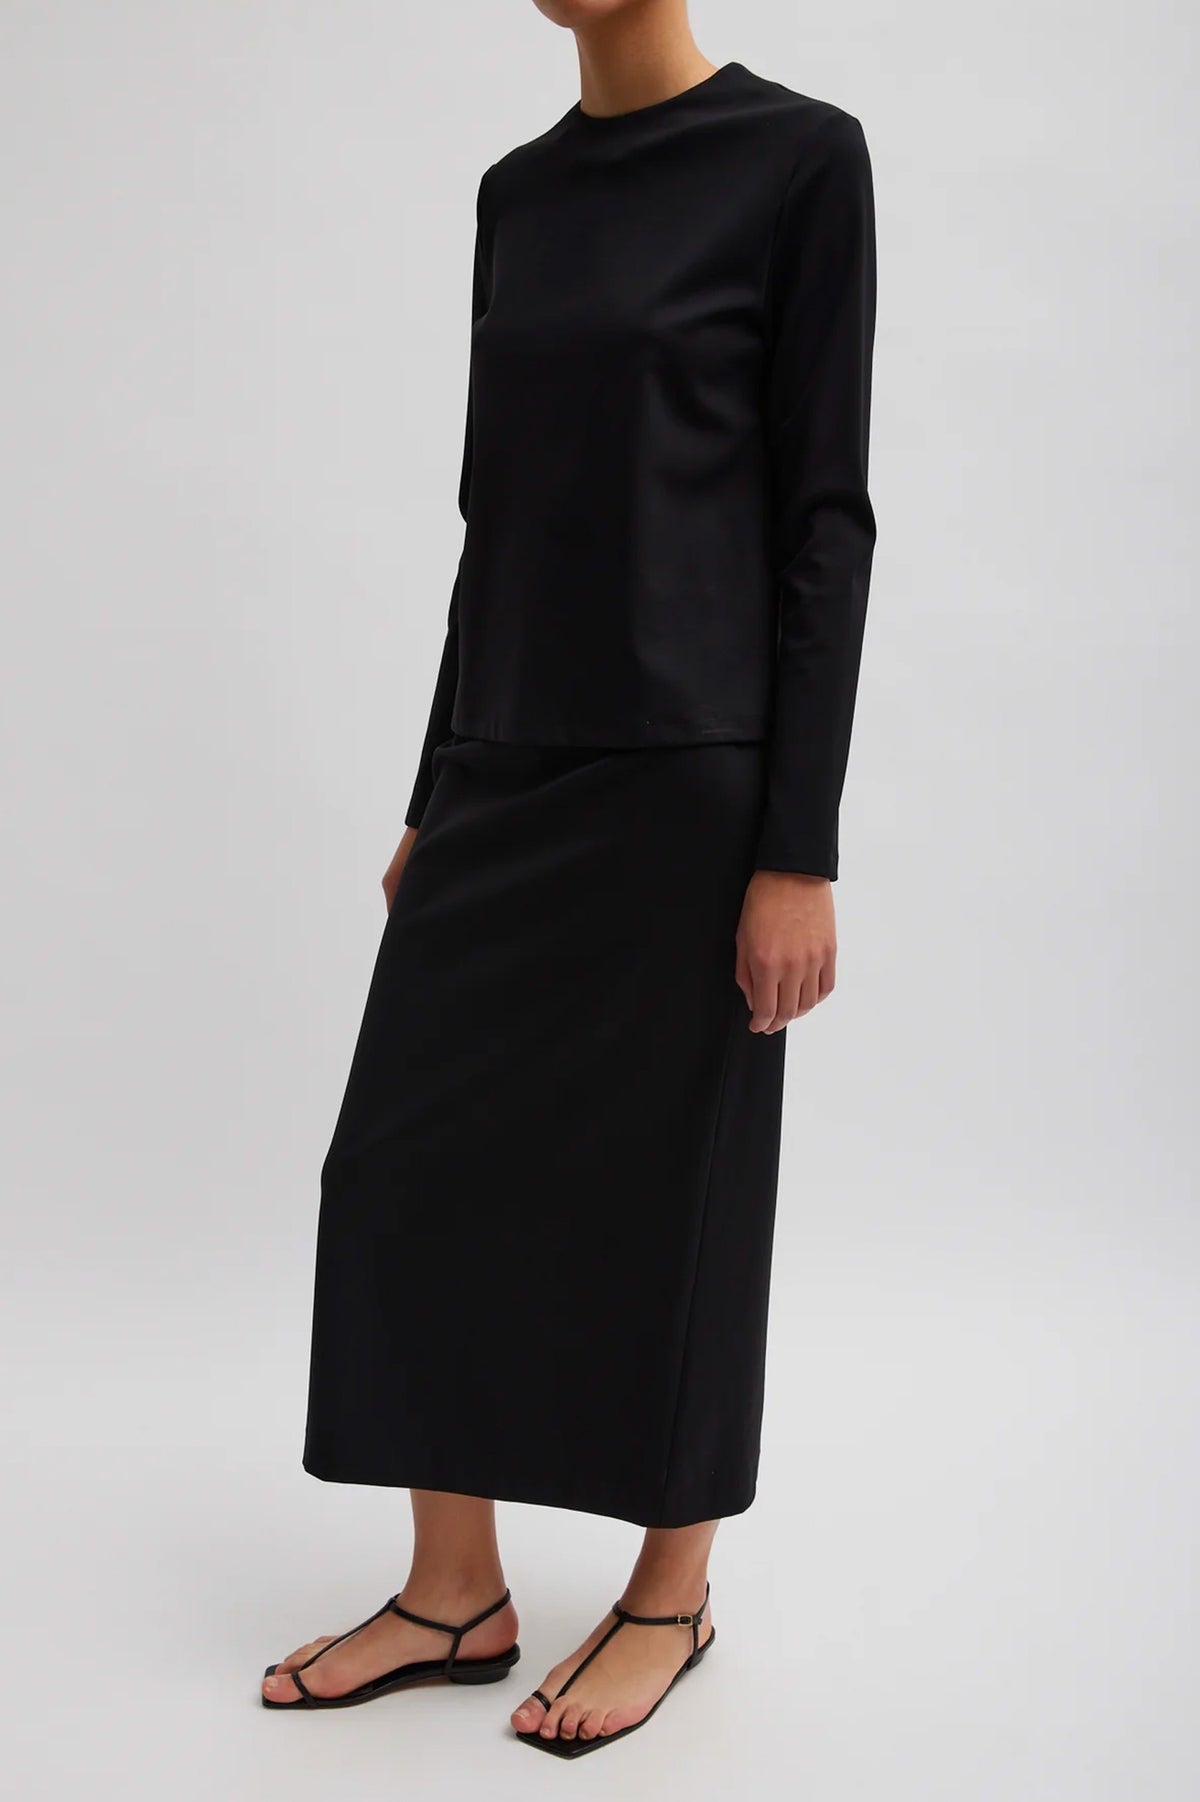 Compact Ultra Stretch Knit Pencil Skirt in Black